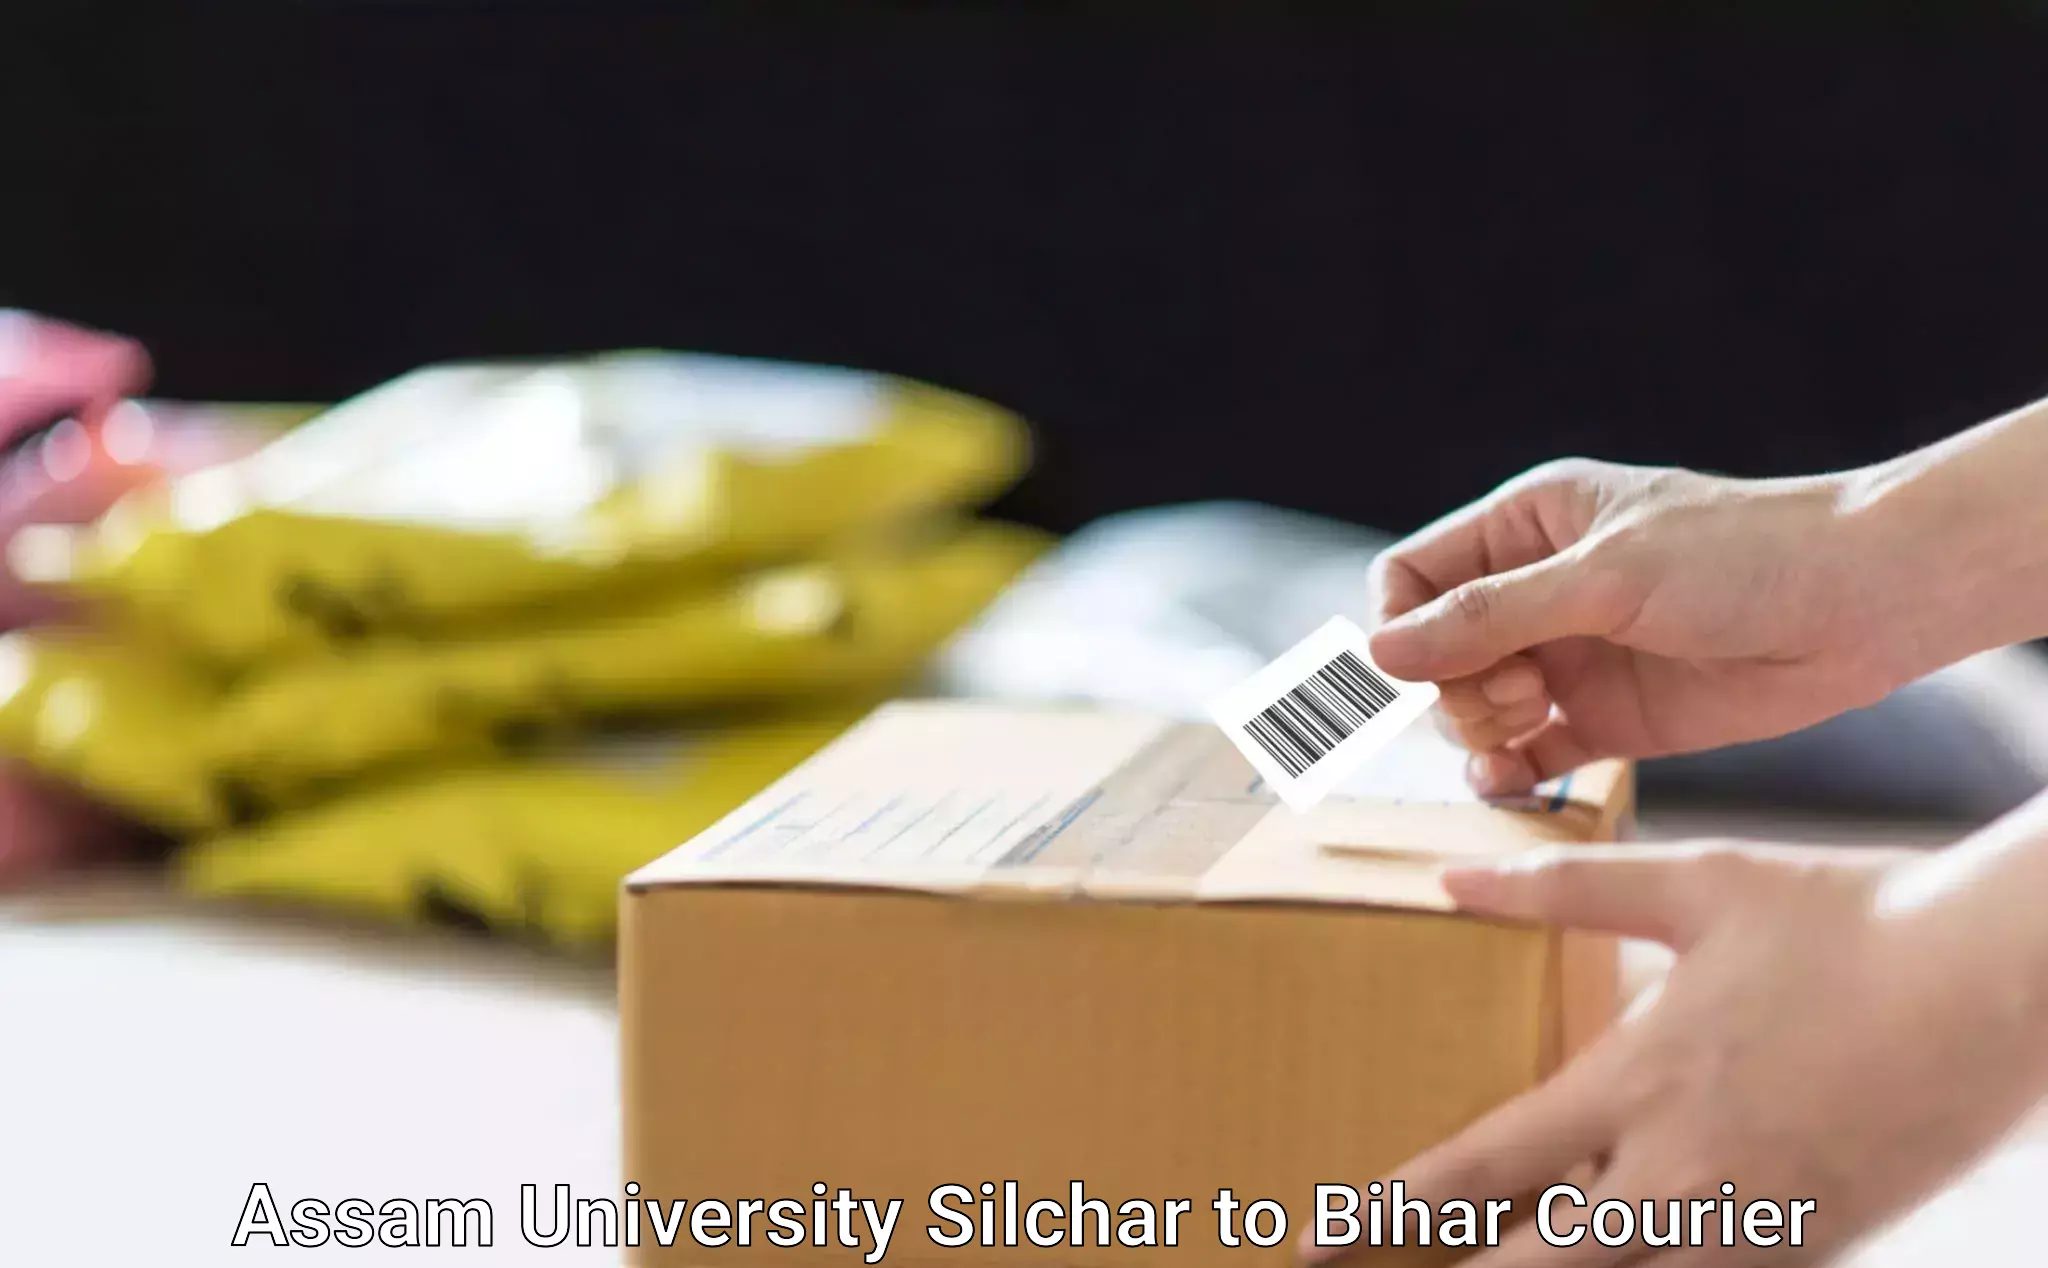 Express package services in Assam University Silchar to Bihar